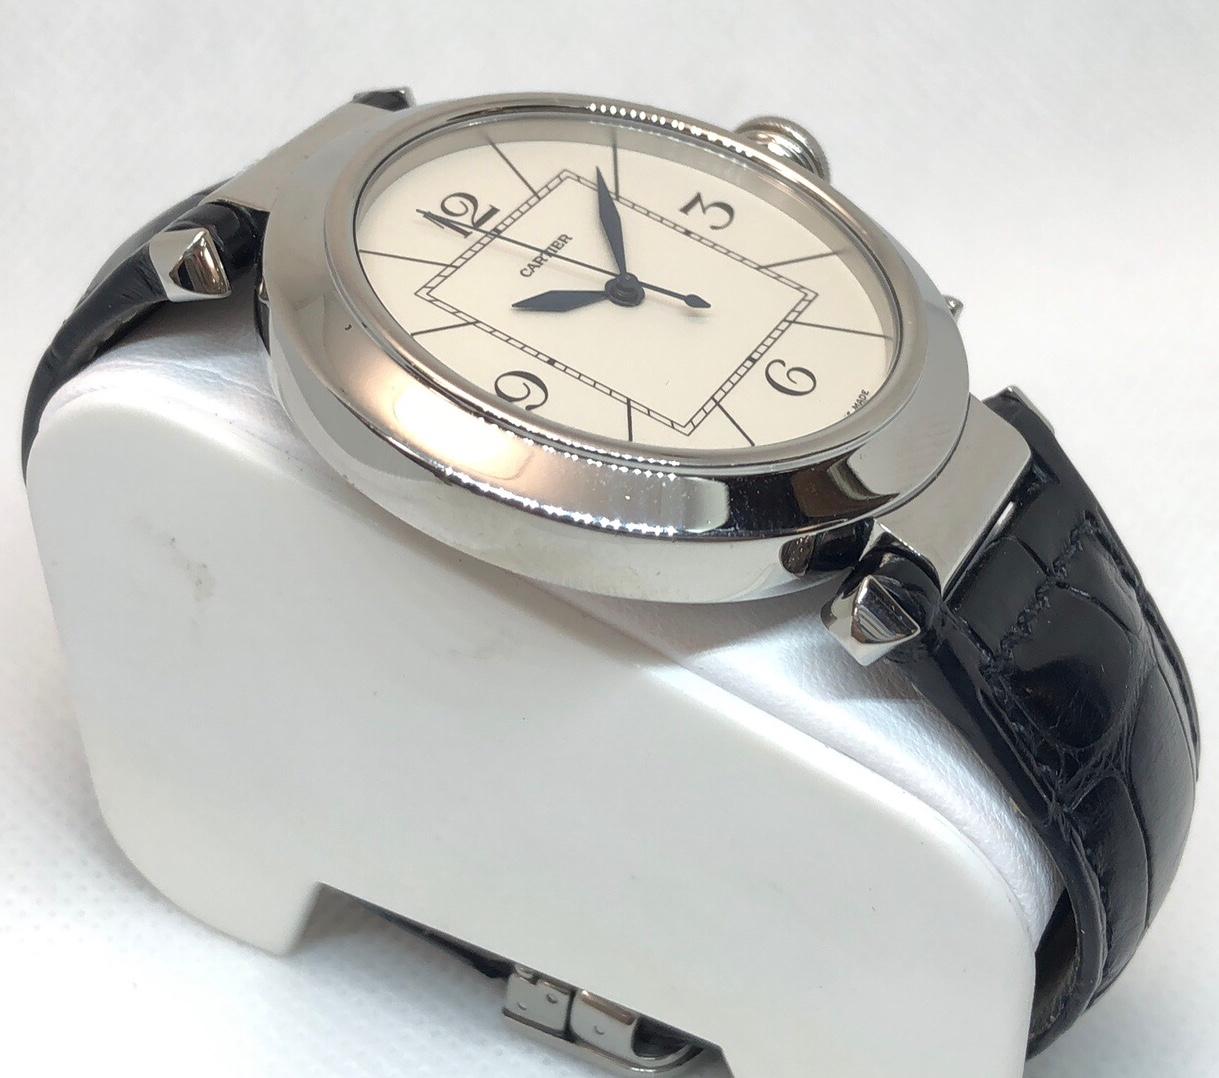 Cartier Pasha Stainless Steel Auto Watch on Leather Strap, Exhibition Case Back

•REFERENCE NO: 2730
•MOVEMENT: AUTOMATIC SELF WINDING
•CASE MATERIAL: STAINLESS STEEL
•CONDITION: LIKE NEW EXCELLENT PRE-OWNED
•CASE MEASUREMENTS: 42MM X 49MM X 9MM